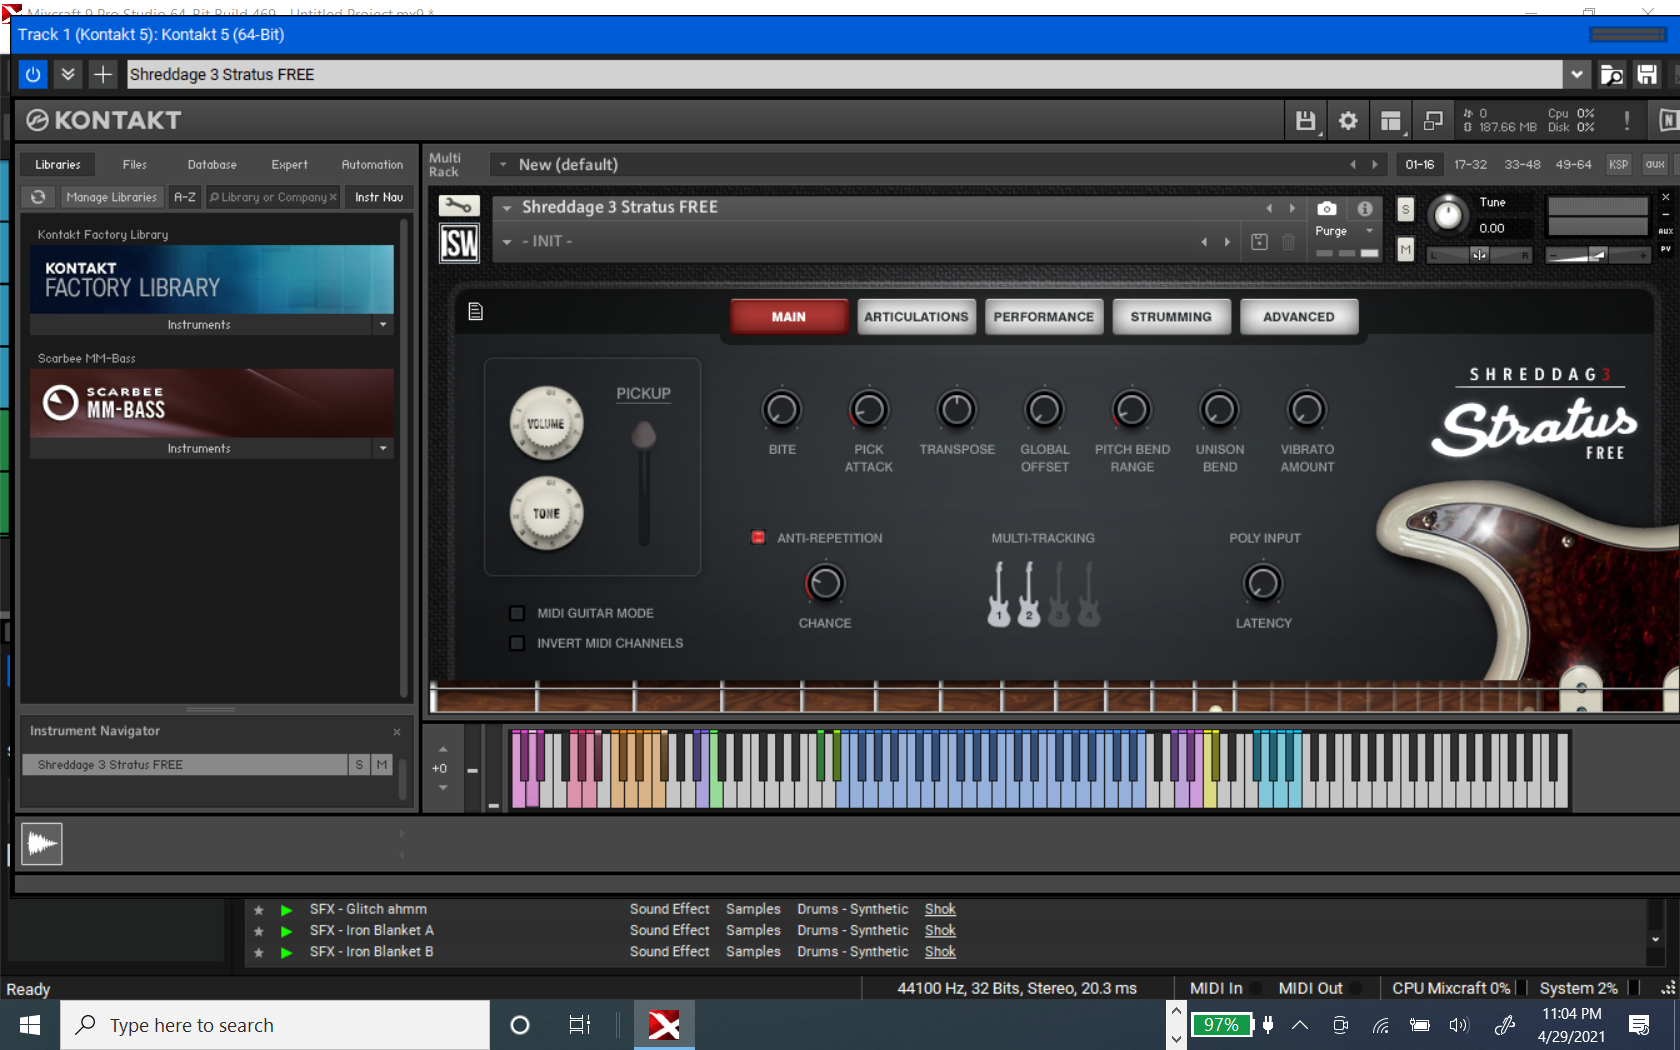 Here's what it looks like when I open Kontakt -- pretty much the same as standalone mode with no Shreddage showing in the library, even though it is open in the main screen.  By the way, the only way I can open Shreddage is to click on the &quot;Load/Save&quot; icon at the top and then click &quot;Load recent...&quot;